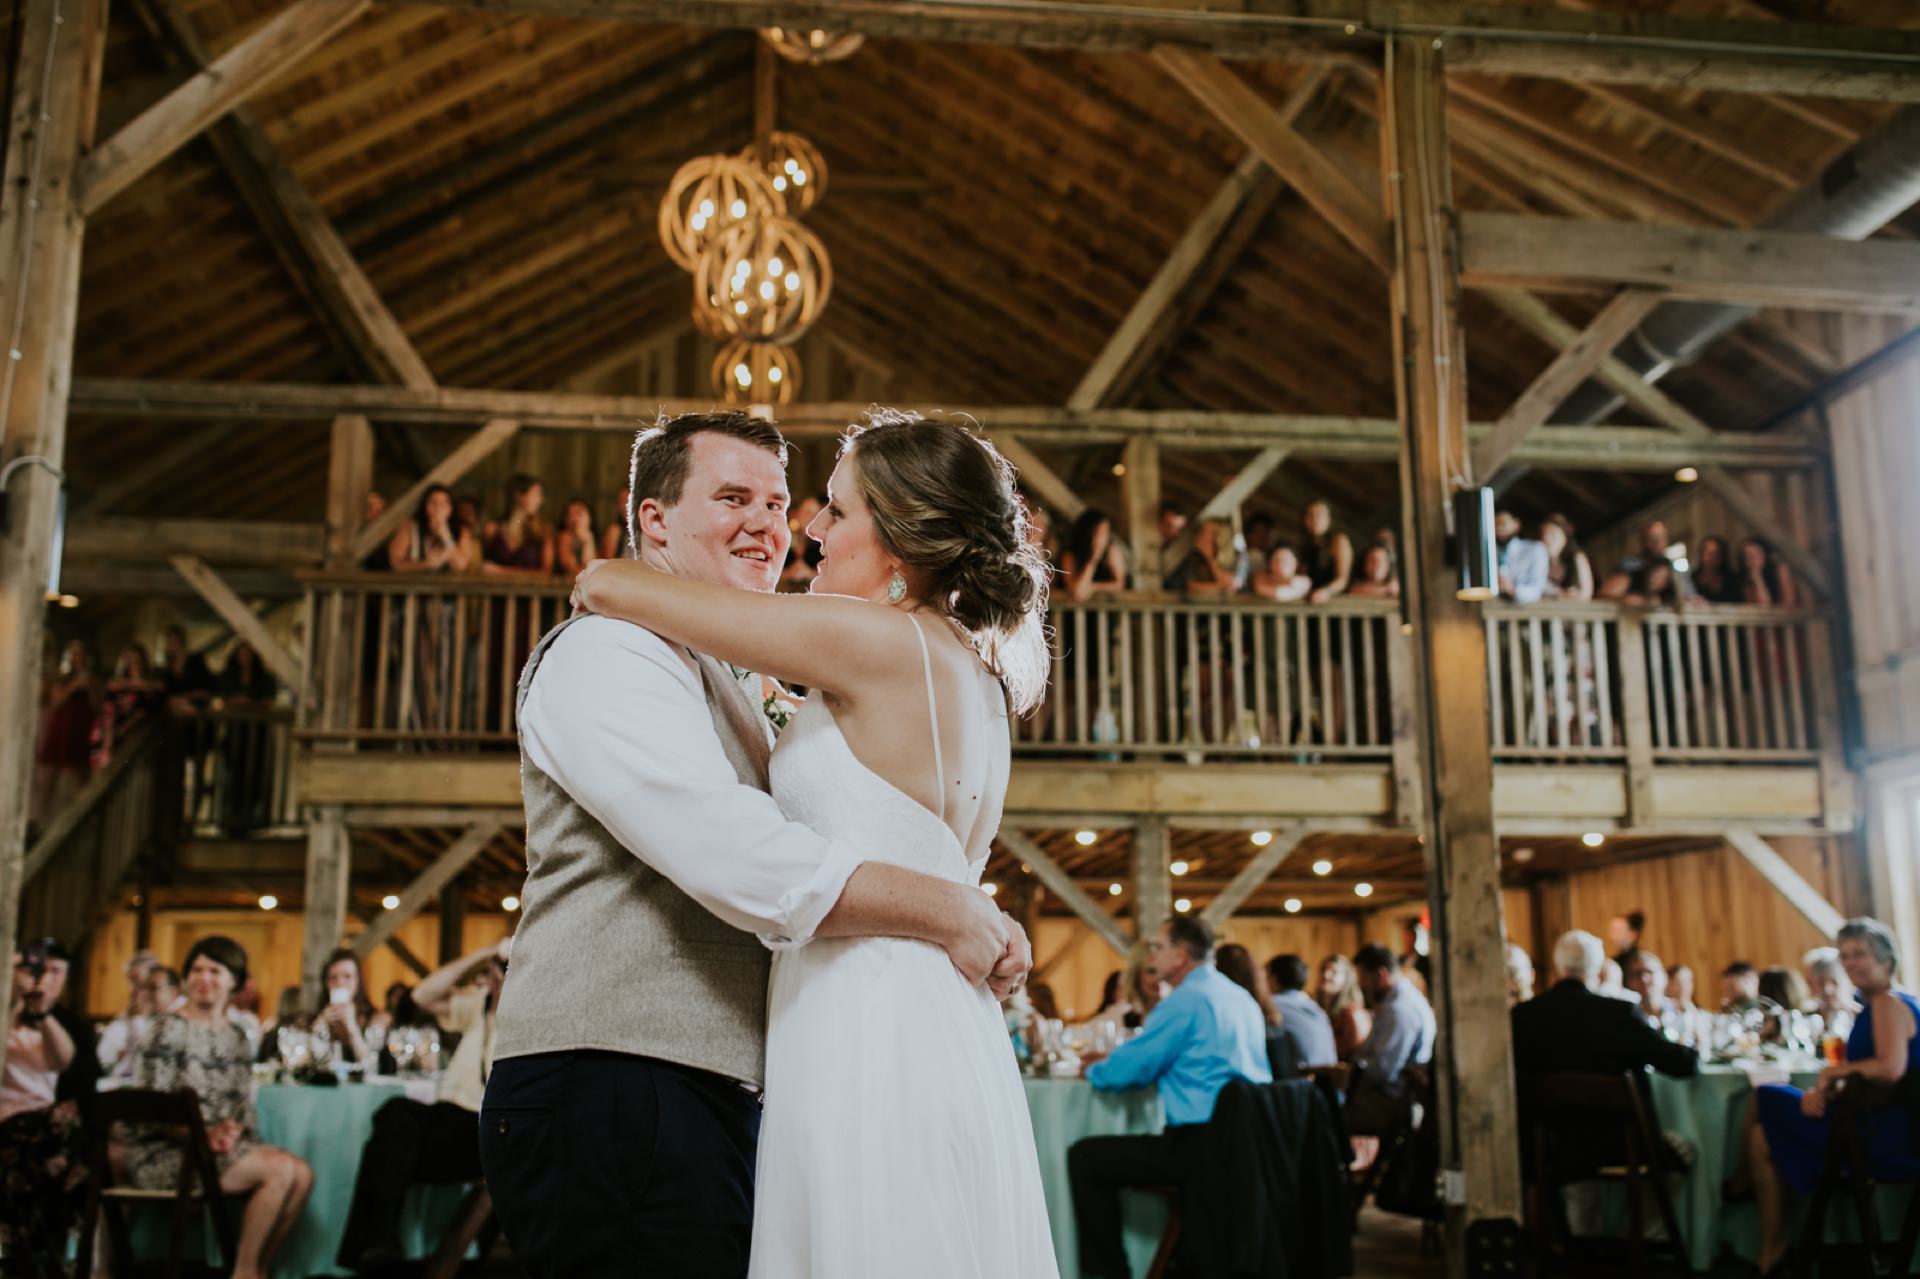 bride and groom dance in barn while guests on dance floor and in balcony look on at this Lindley Farmstead wedding